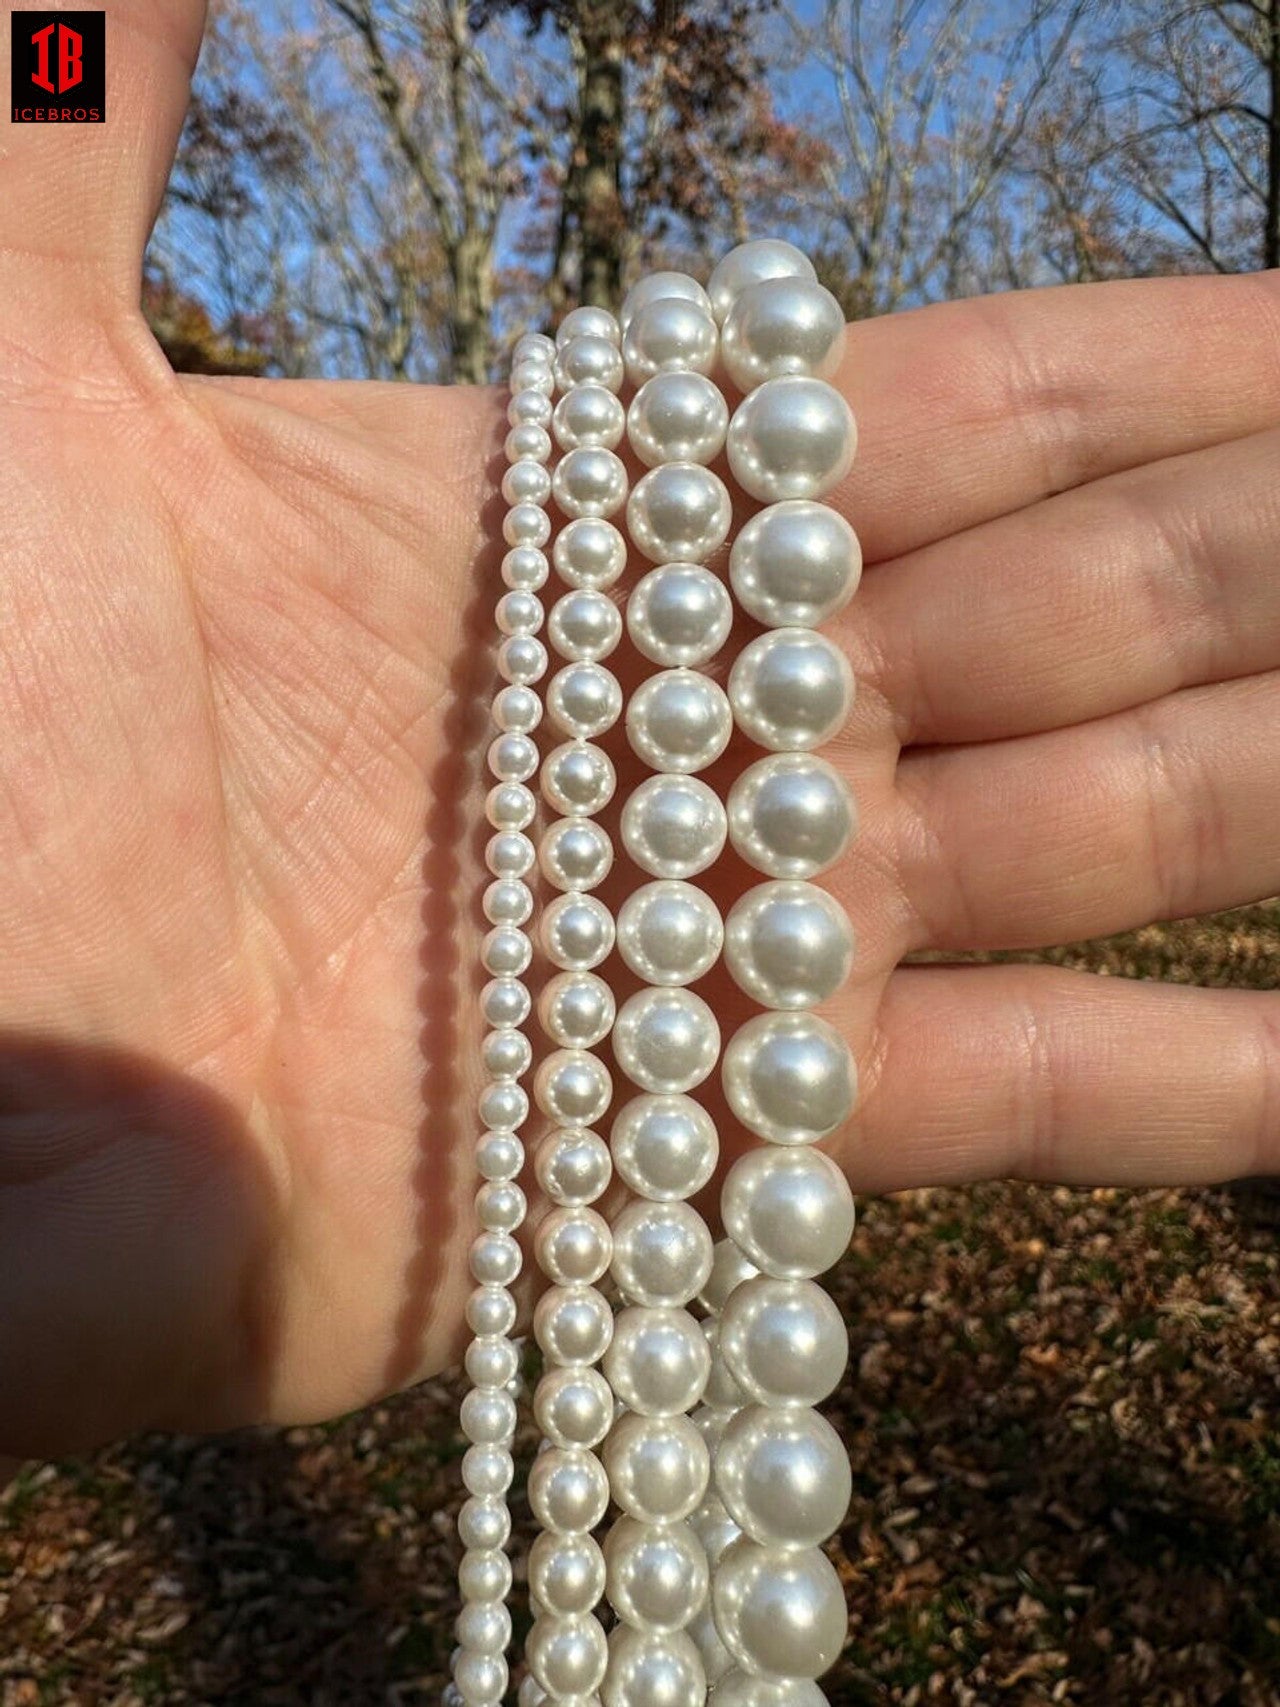 White Cultured Pearl Necklace 925 Sterling Silver Clasp Vintage Chain For Men & Women